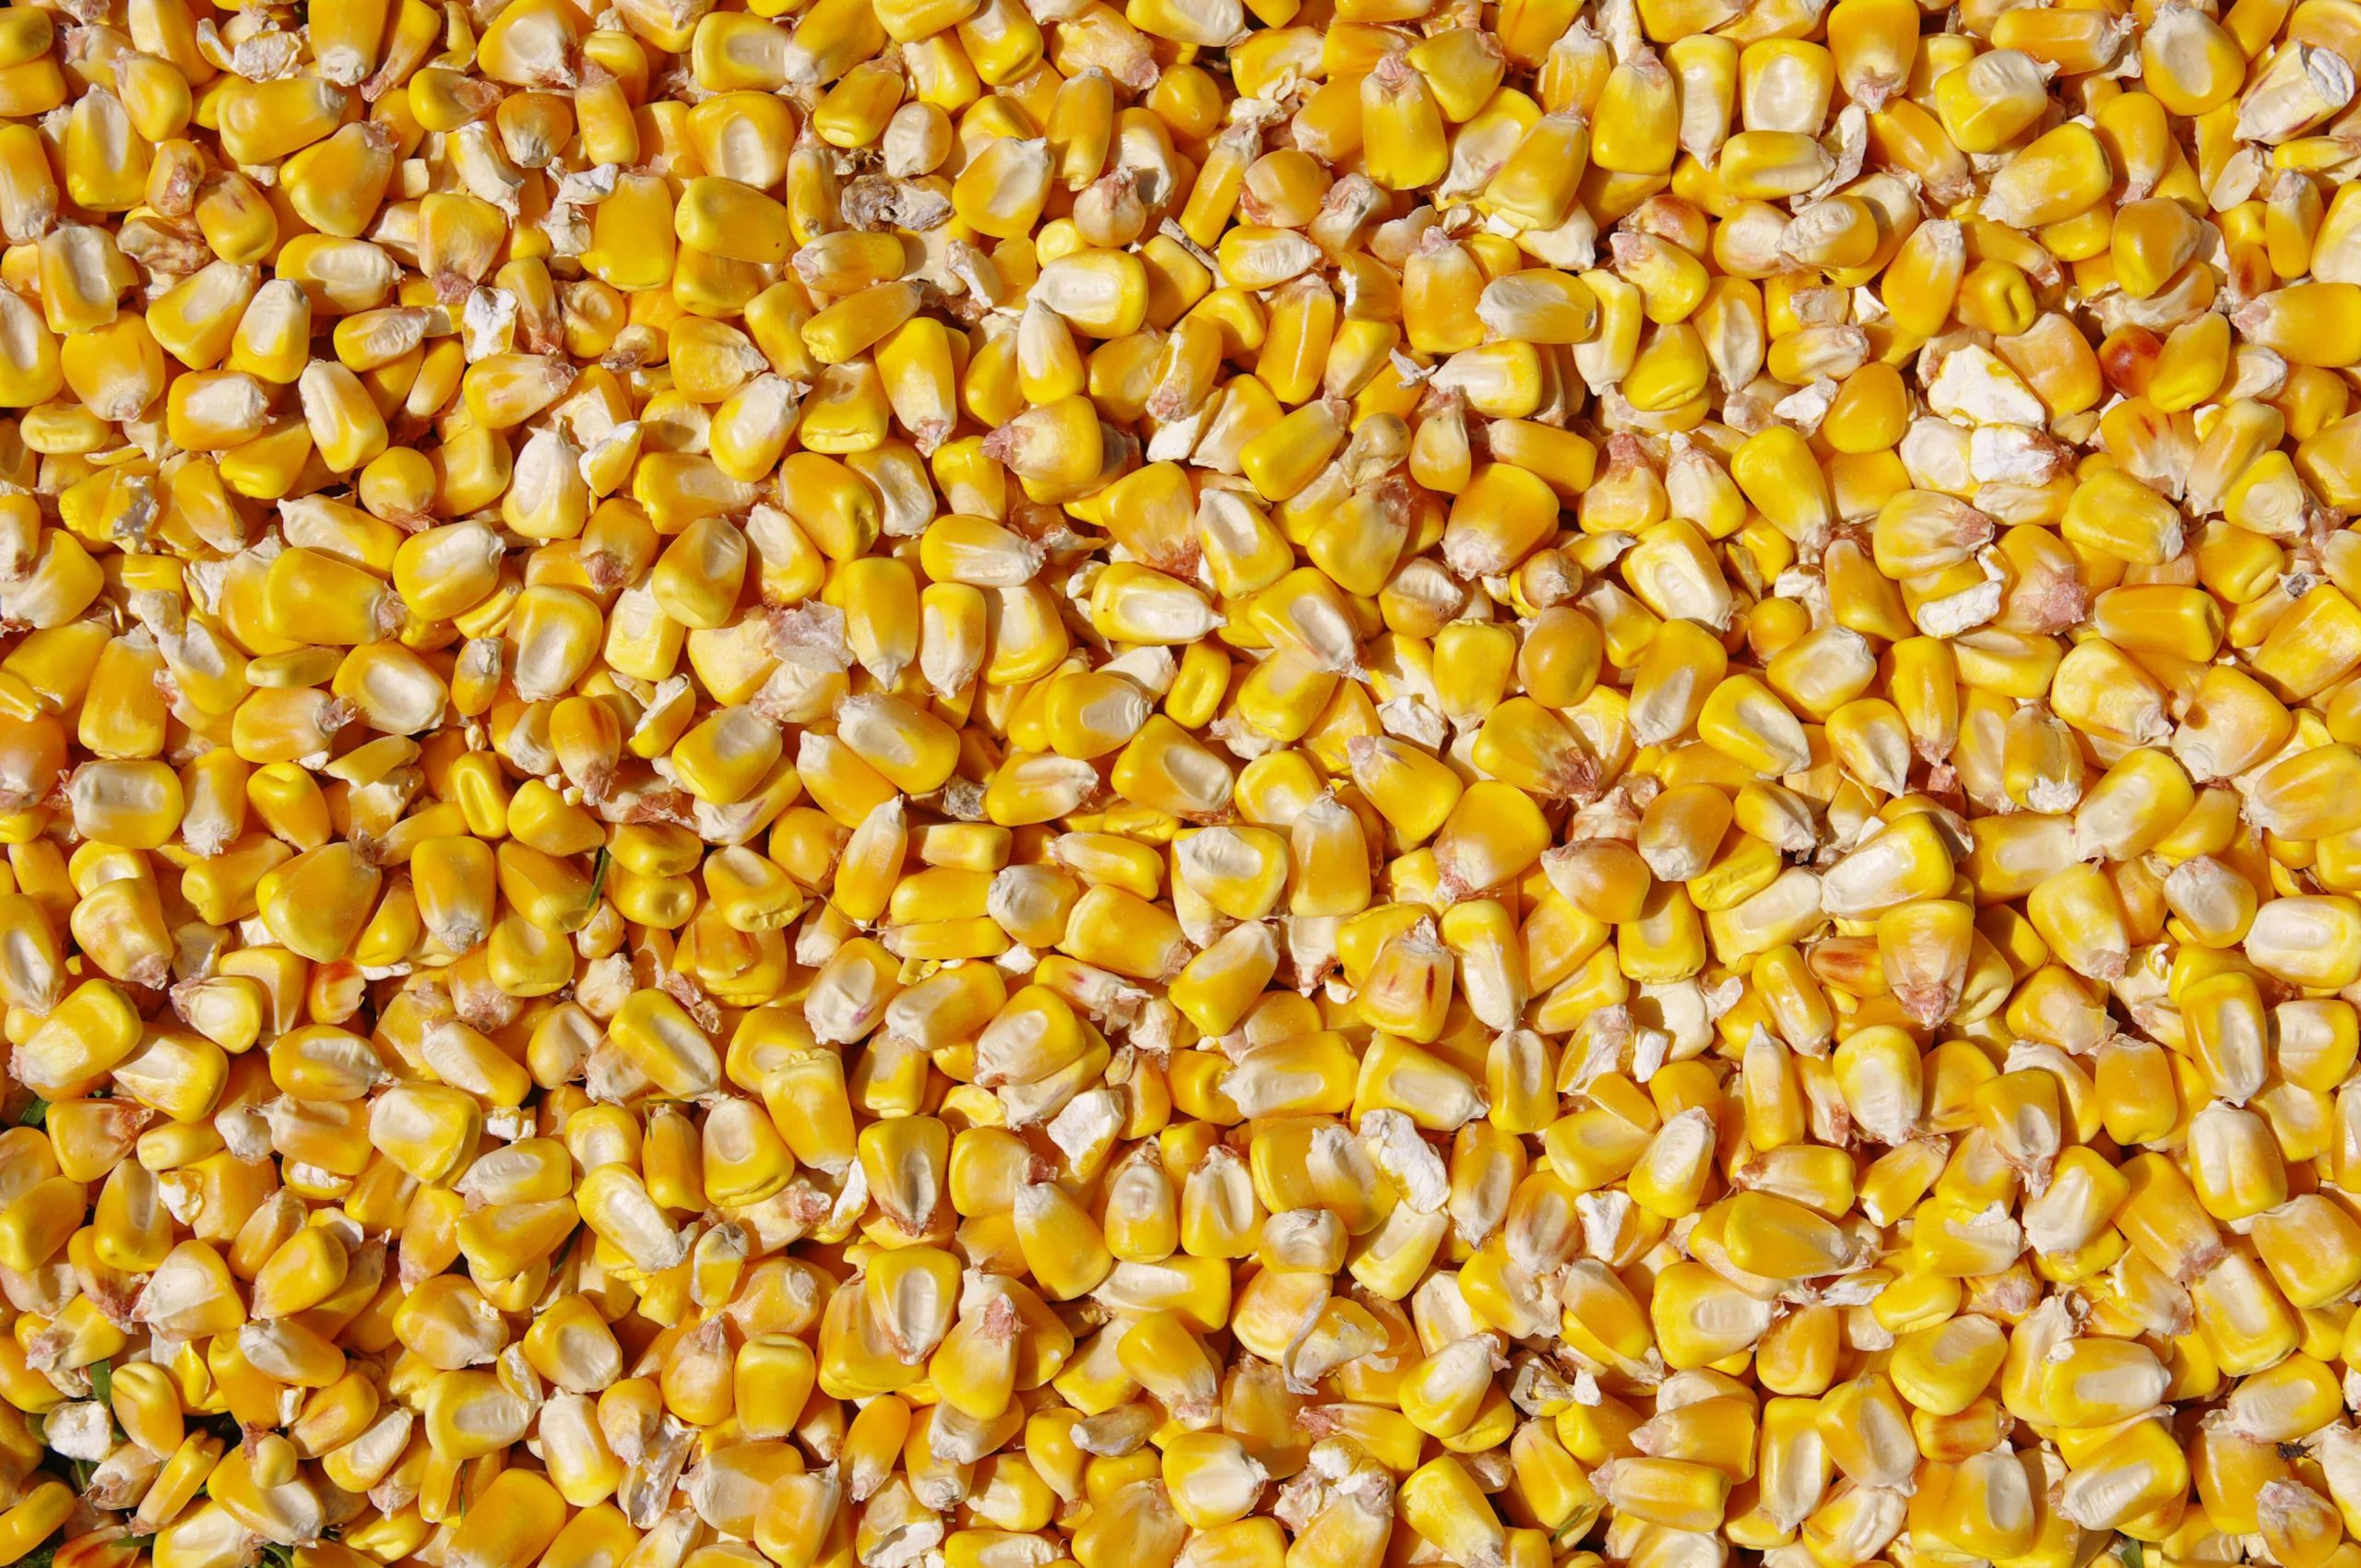 Shelled or cracked corn